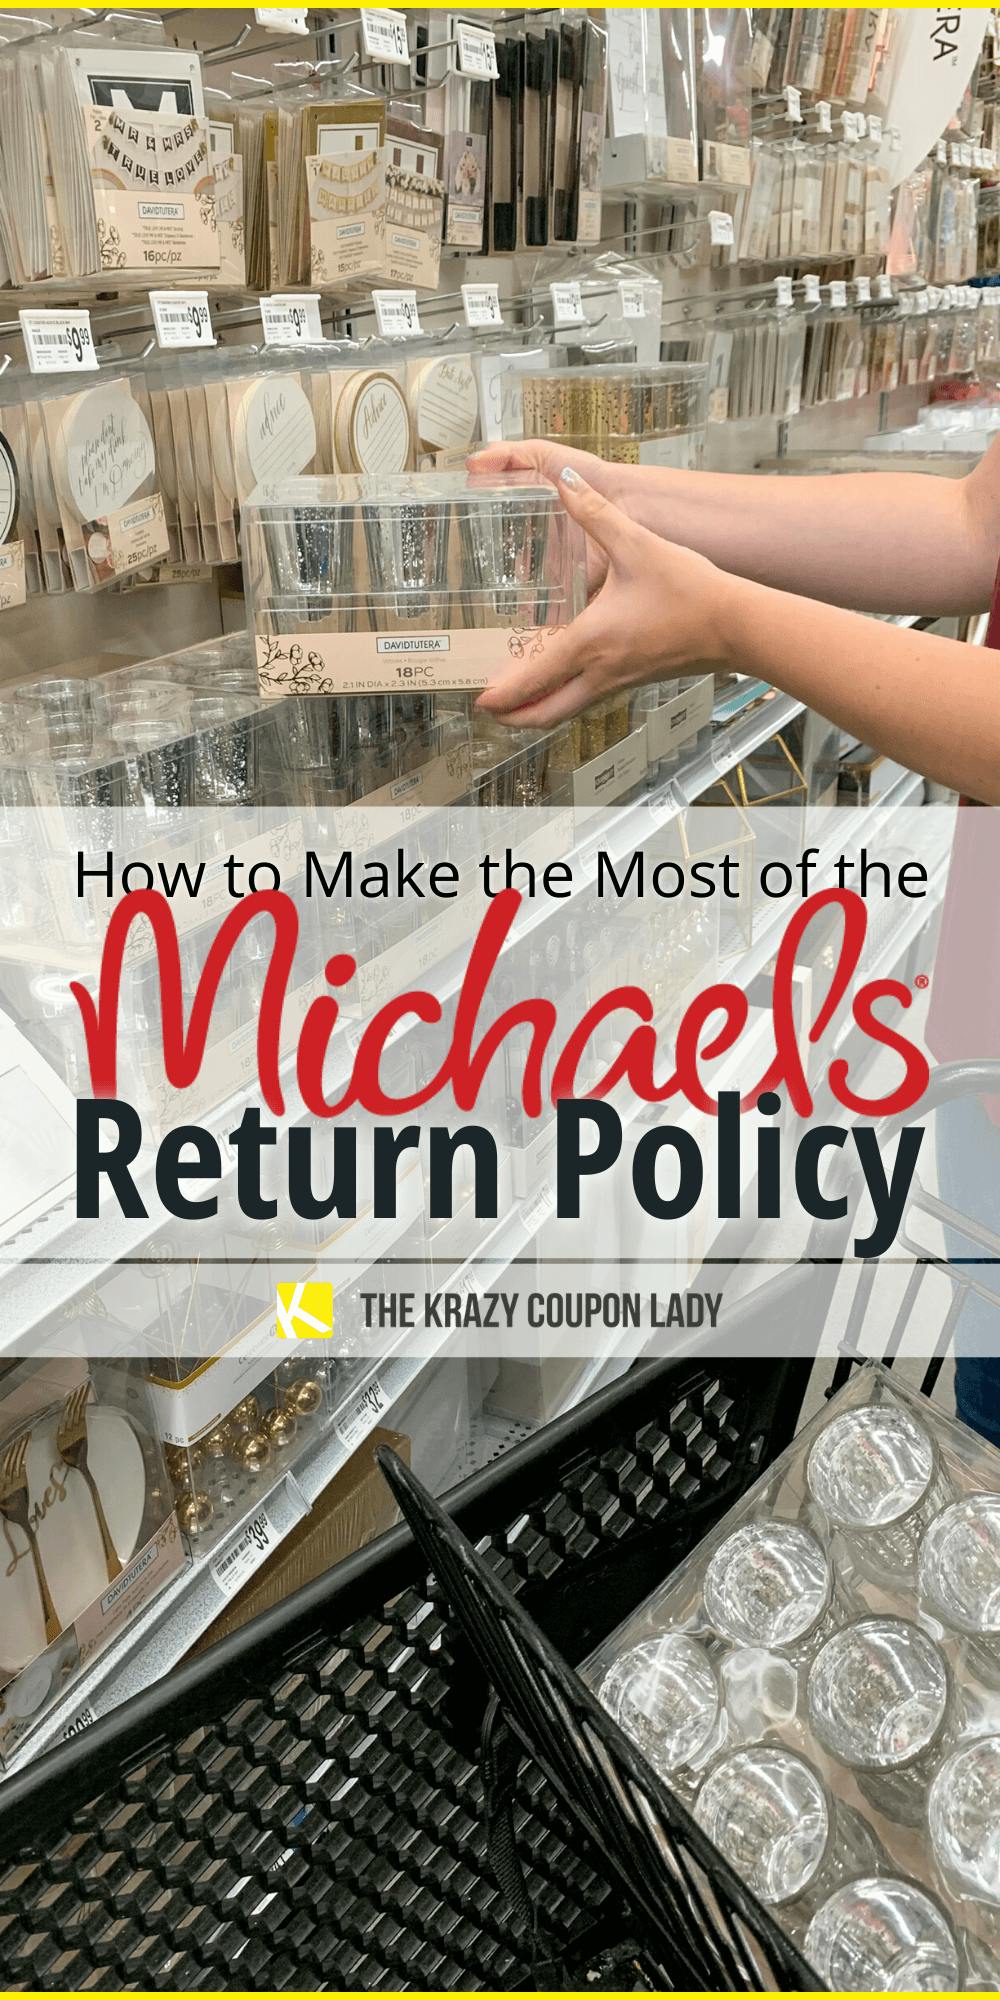 Confused about Michaels return policy? Let's break it down.